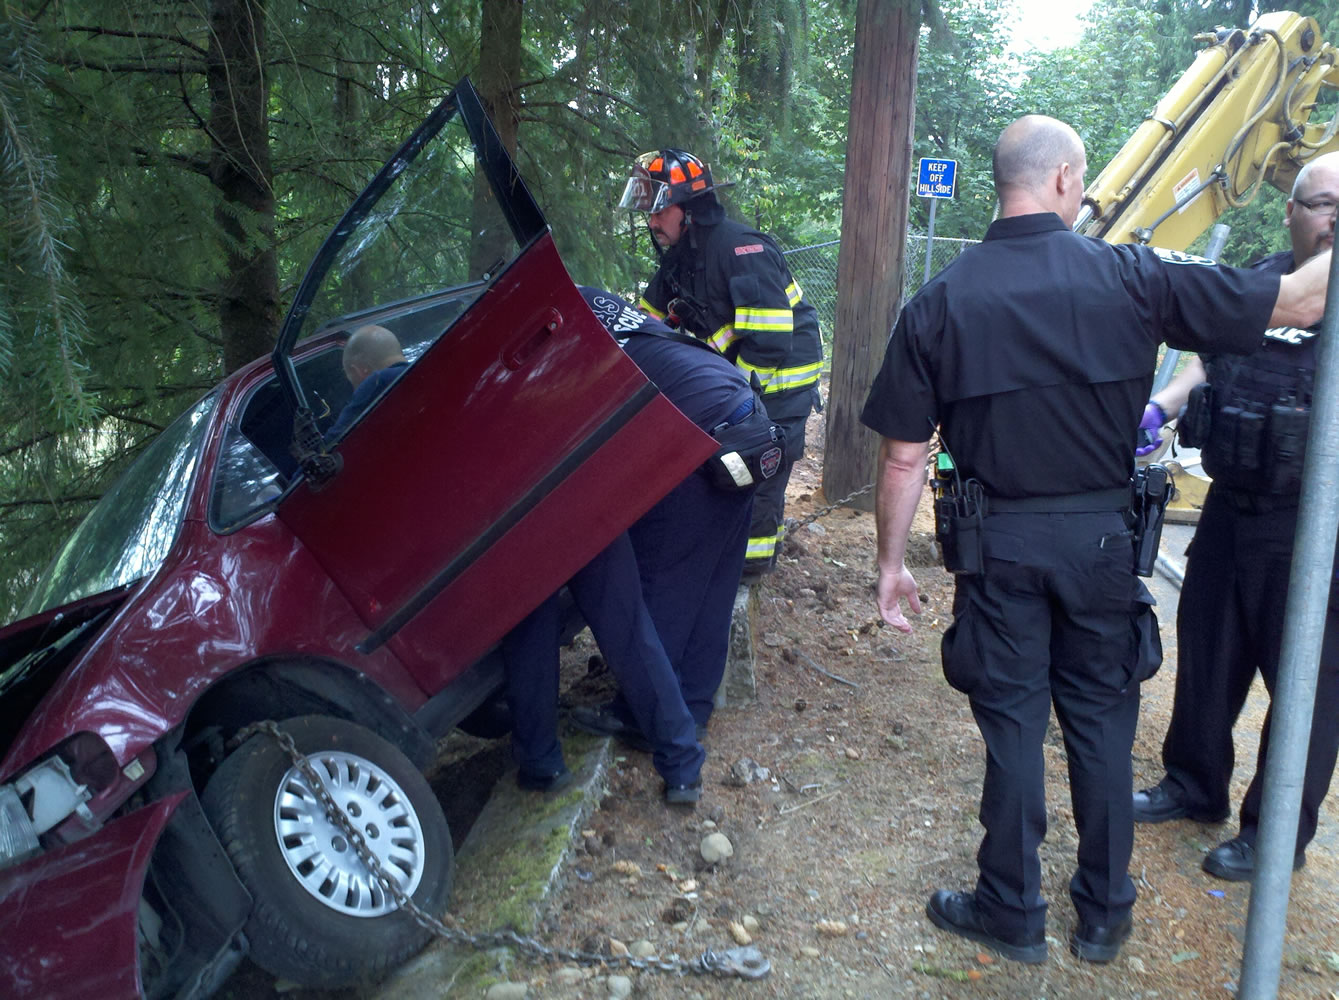 Firefighters on Friday morning extricated a trapped victim inside a car near Hathaway Park in Washougal.